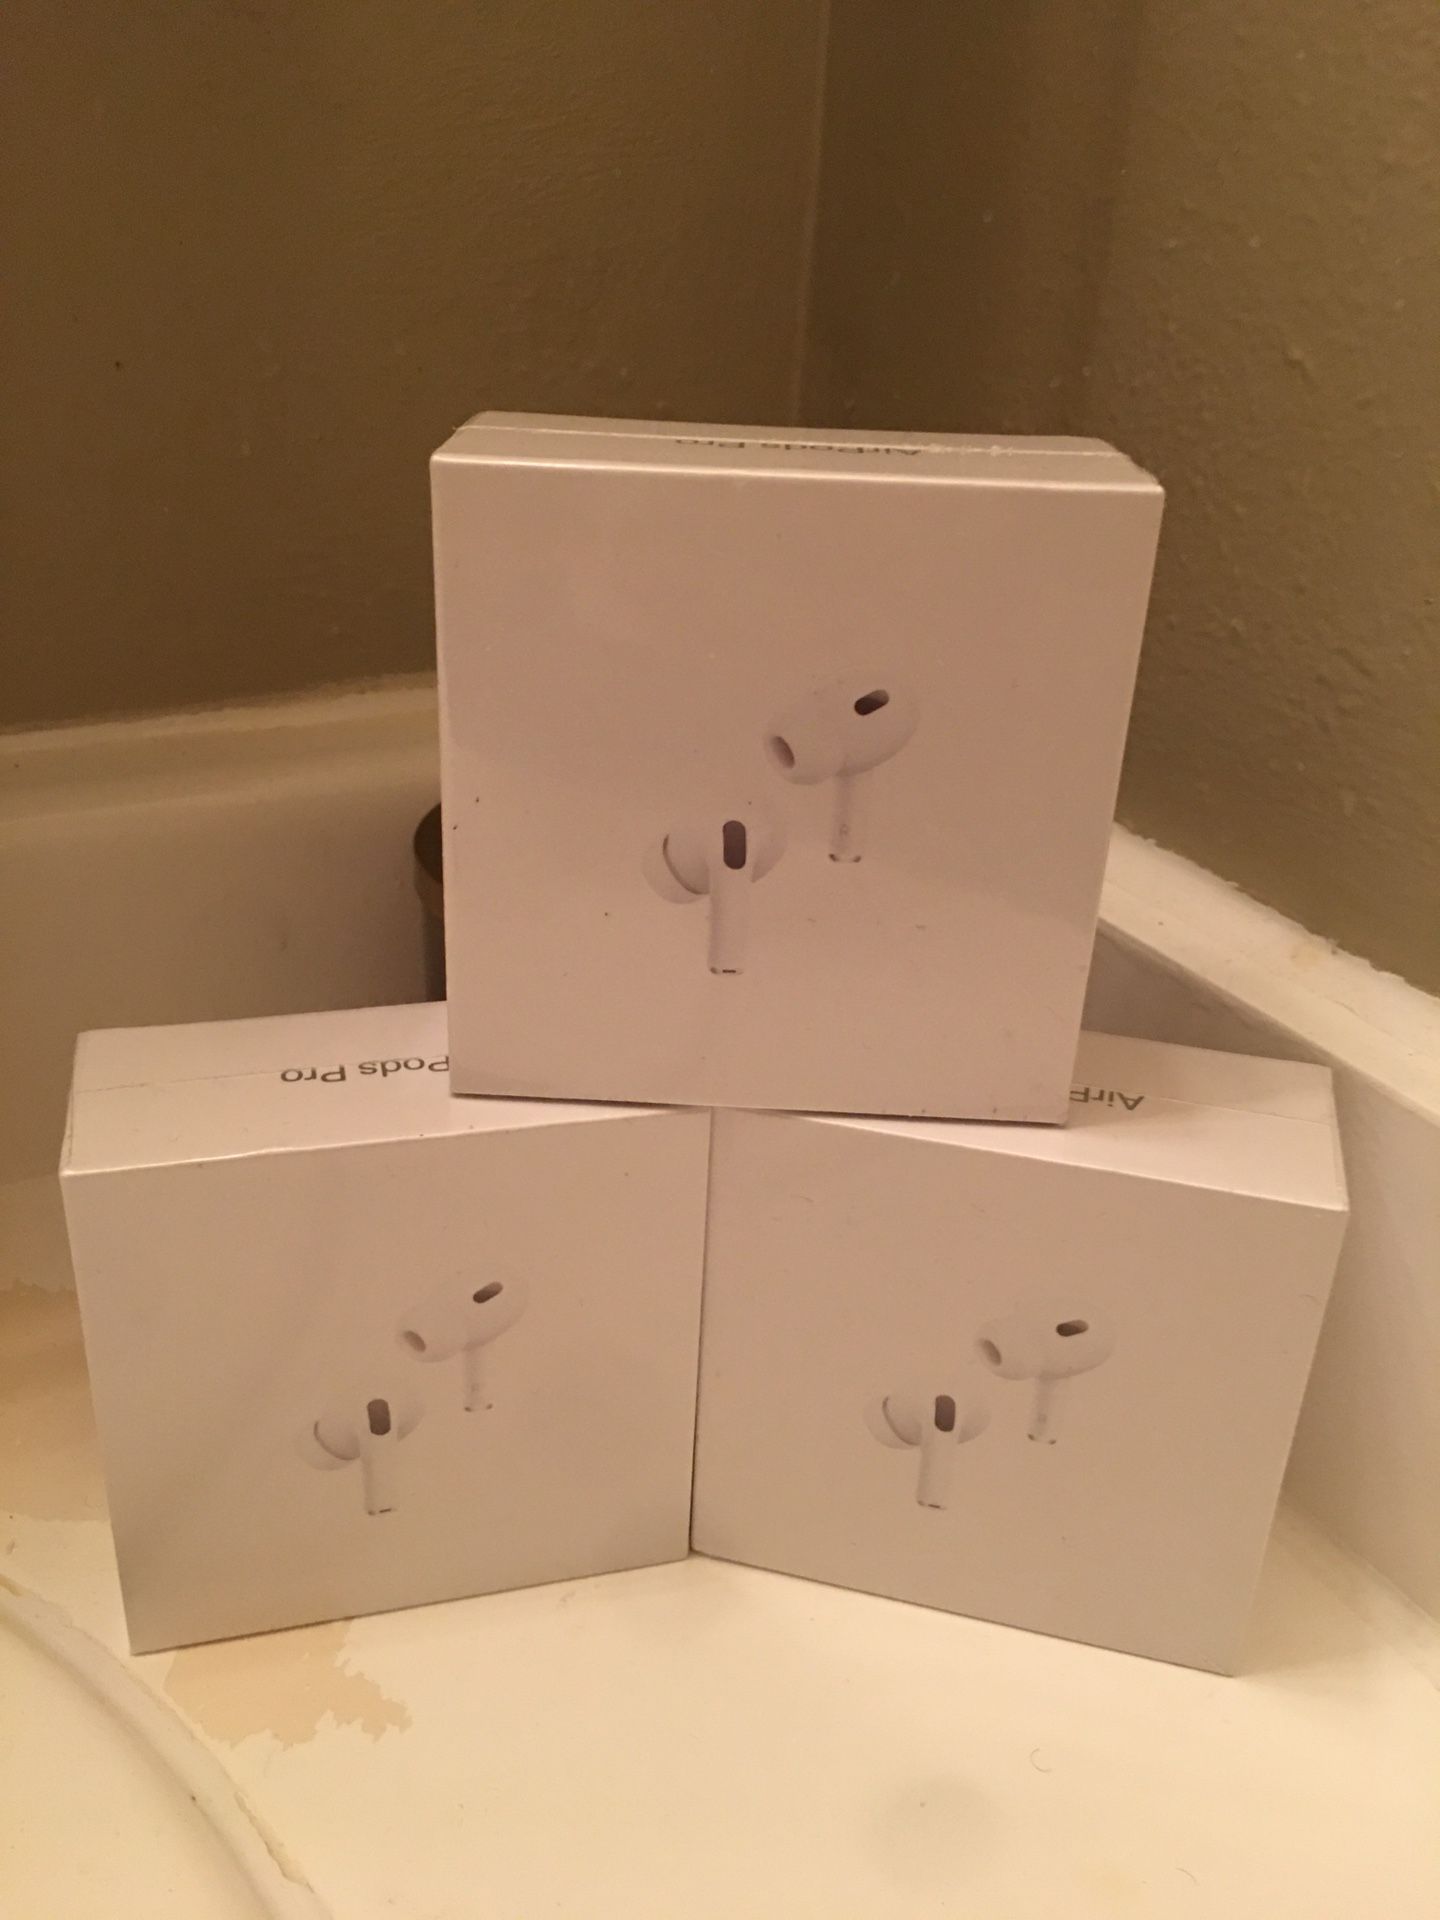 Best Offer AirPod Pro 2nd Generation 